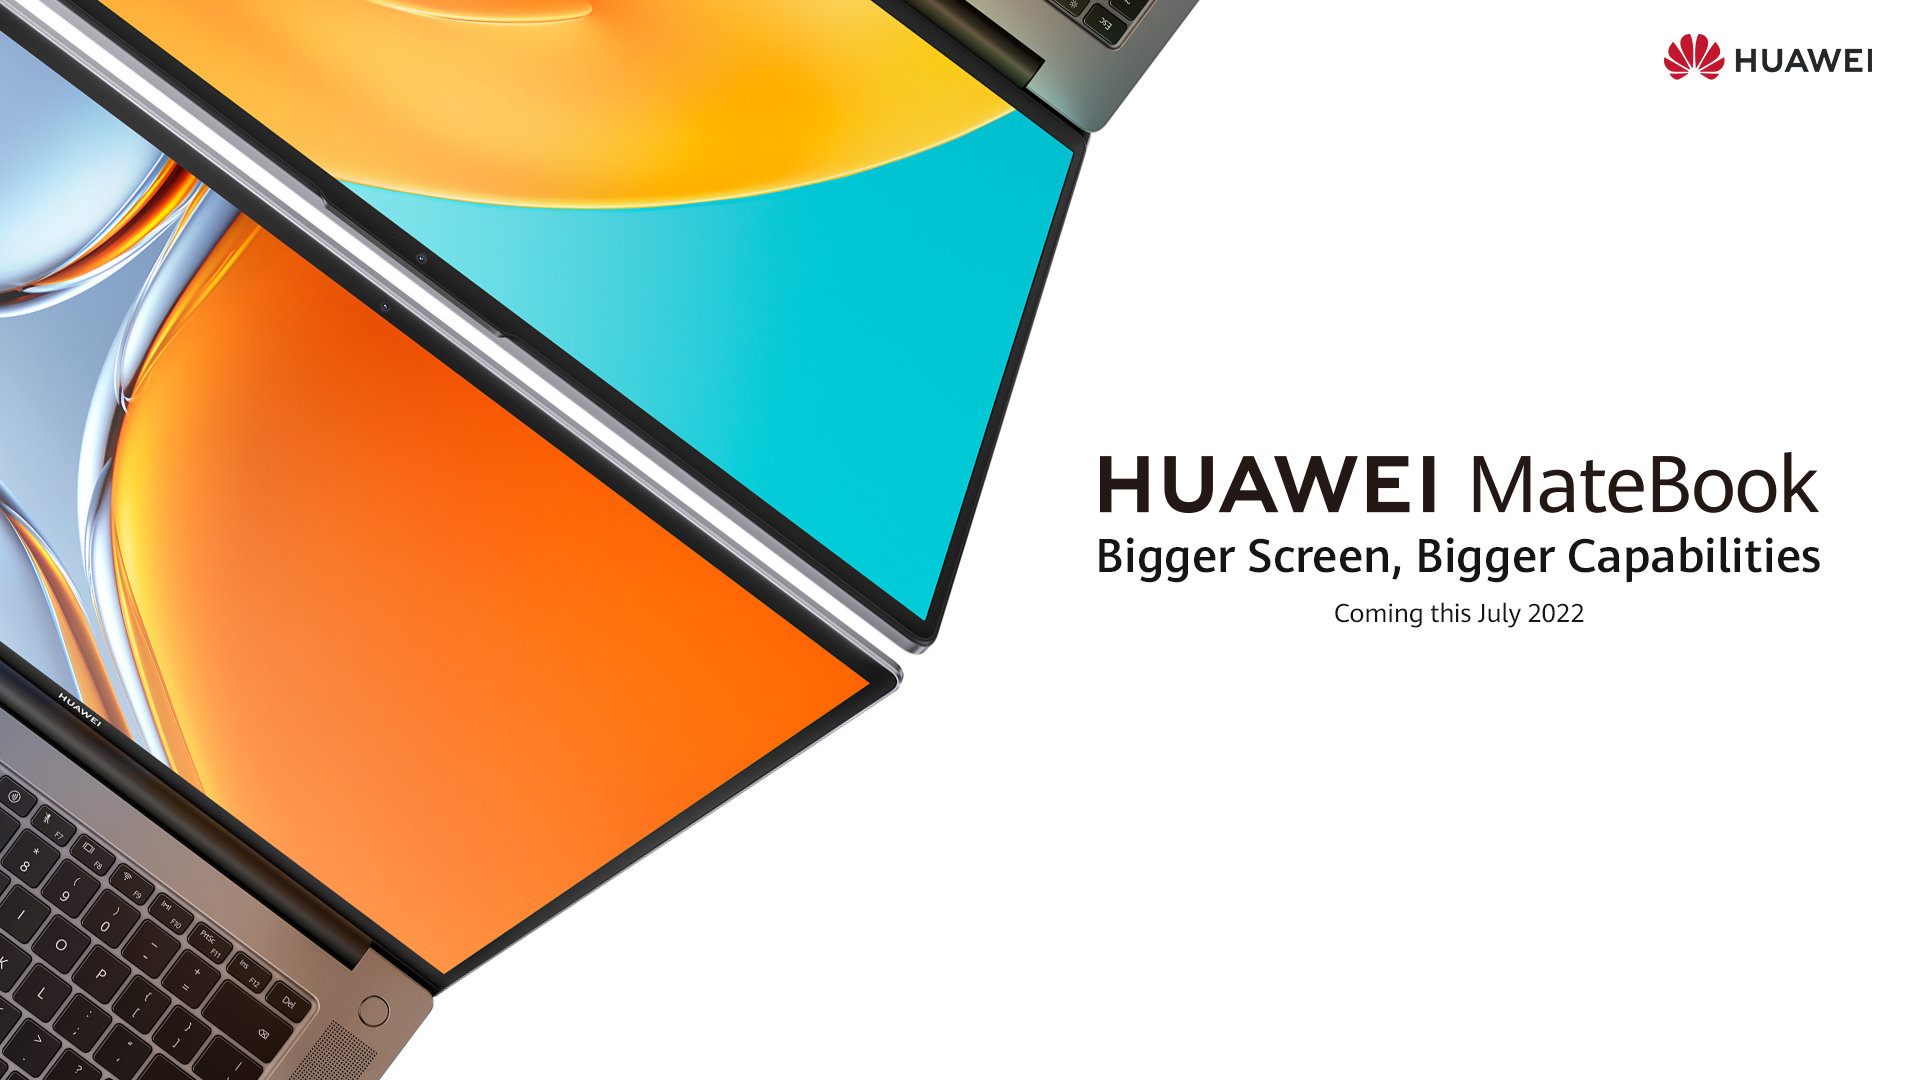 Expand your world with HUAWEI MateBook laptops this July — featuring HUGE screens, processors, and Super Device capabilities!